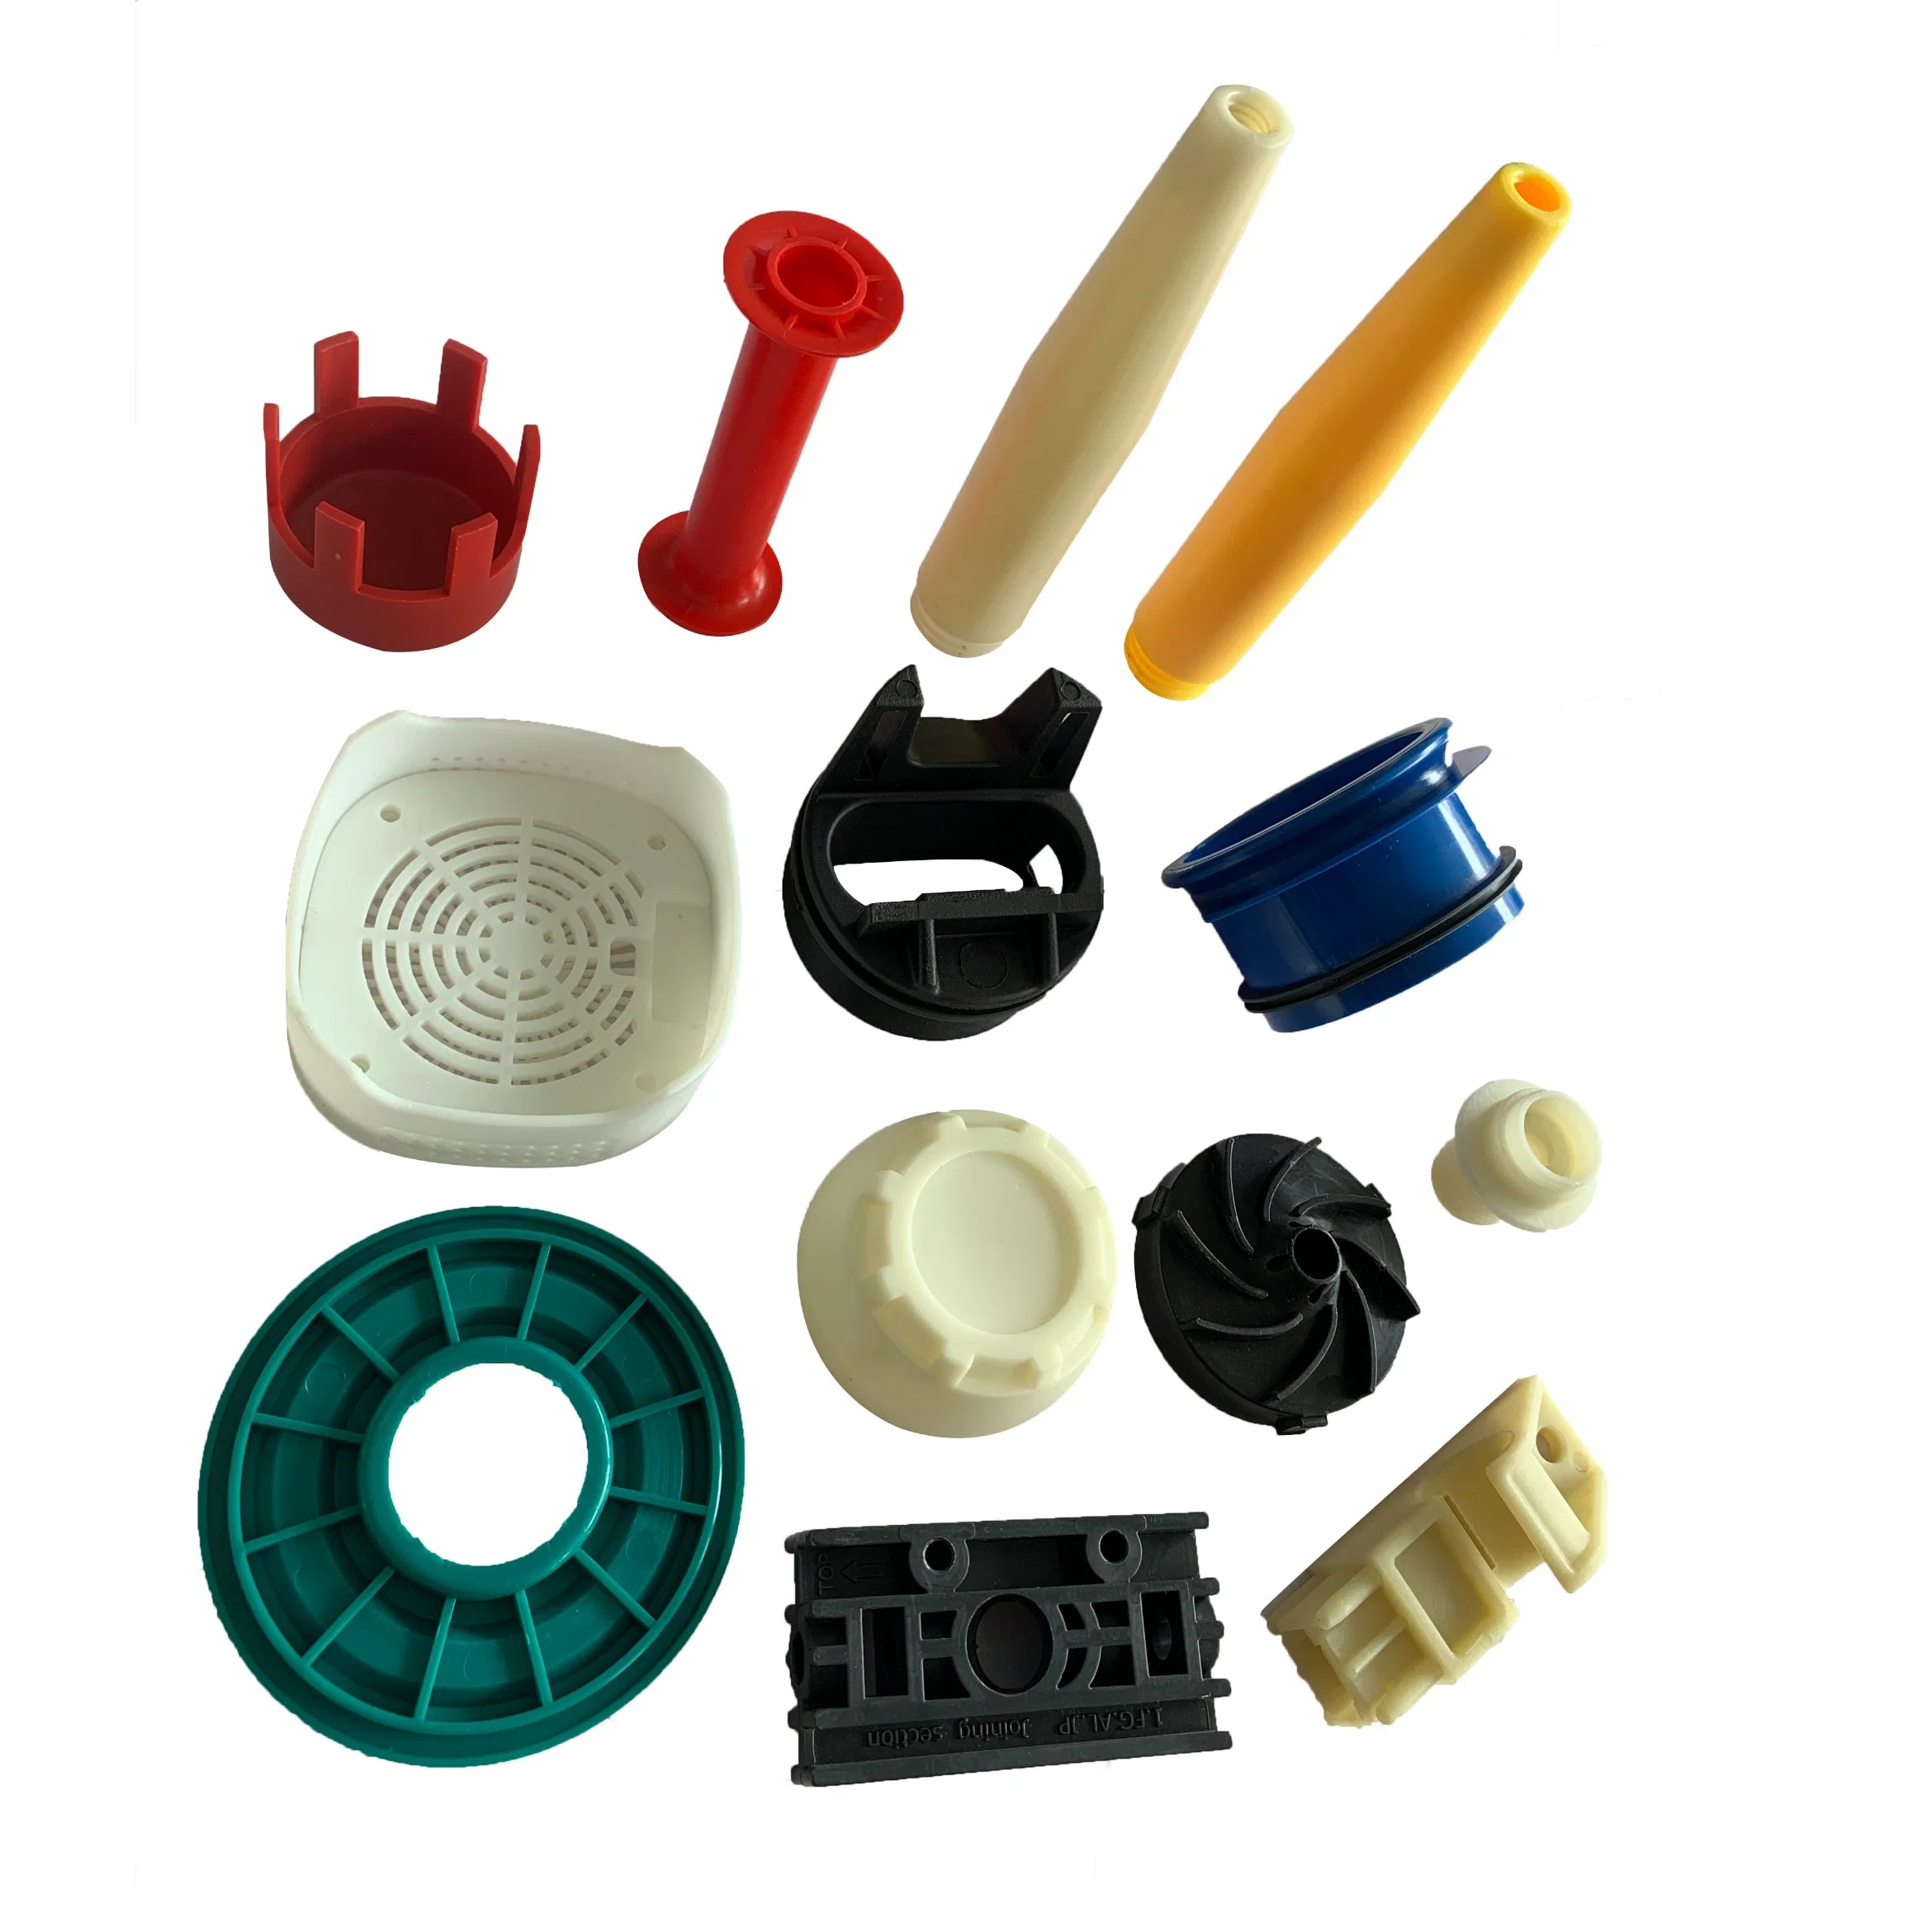 ABS Plastic Product Manufacture OEM/ODM Mold Design Plastic Molding Product